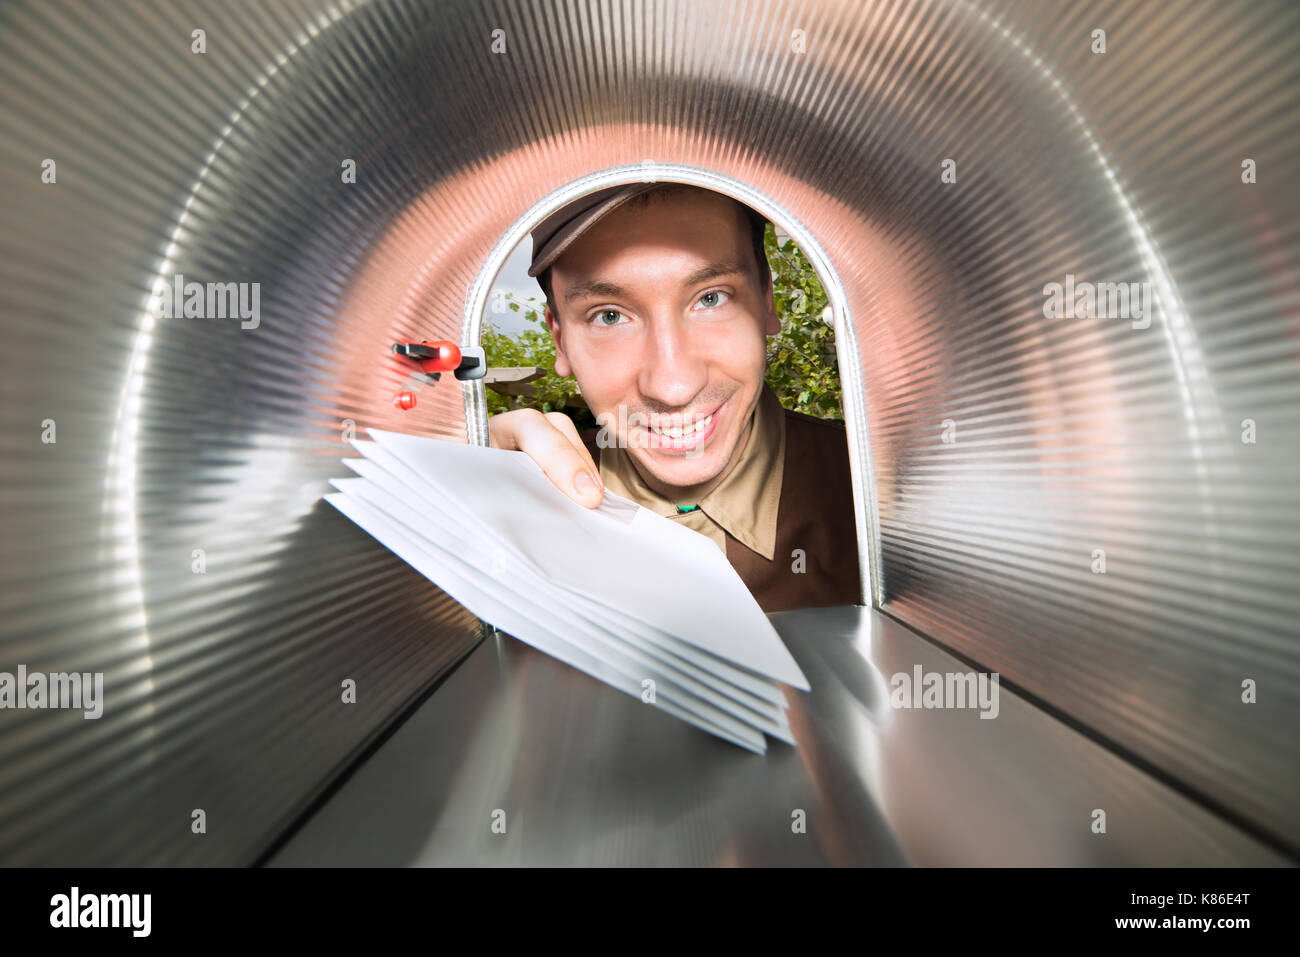 Close-up Of Happy Mailman Placing Envelopes View From Inside The Mailbox Stock Photo